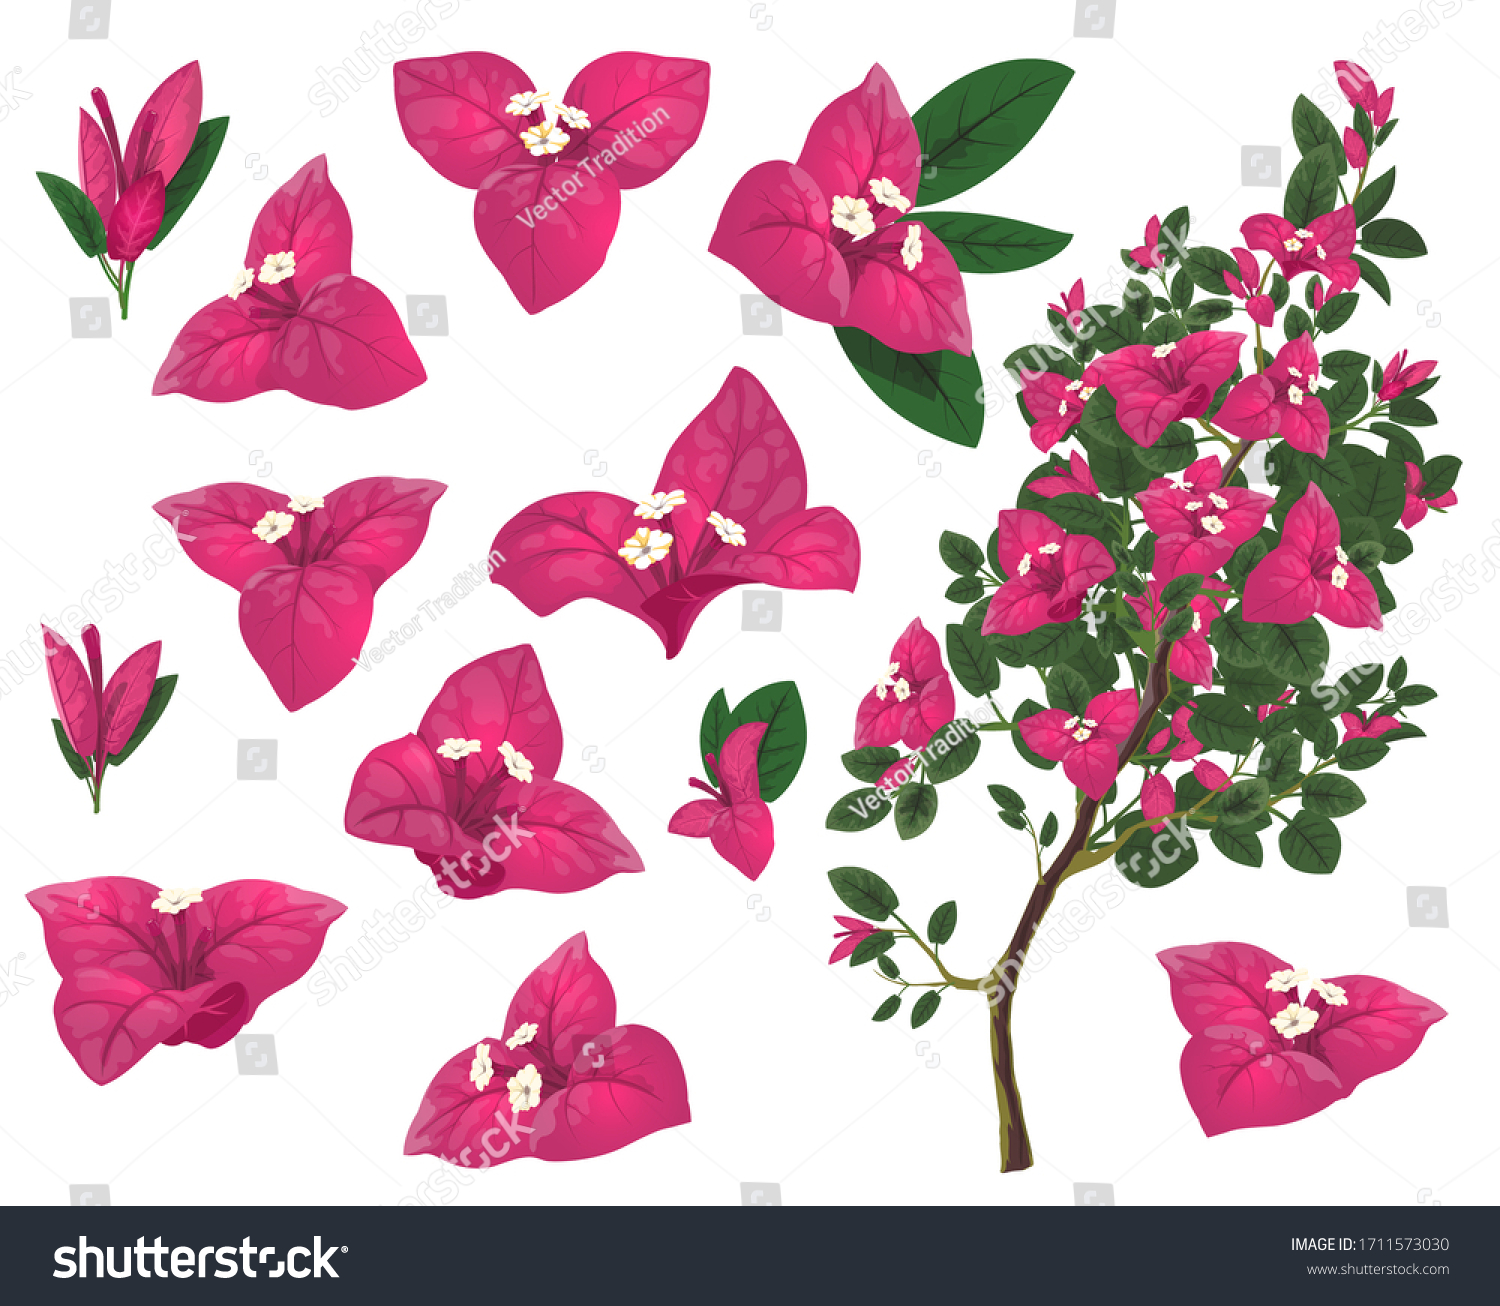 SVG of Bougainville plant of Mexico, isolated vector bougainvillea branch, pink flowers and green leaves. Exotic Mexican blossoms, evergreen plant growing in Peru and South America, realistic 3d icons set svg